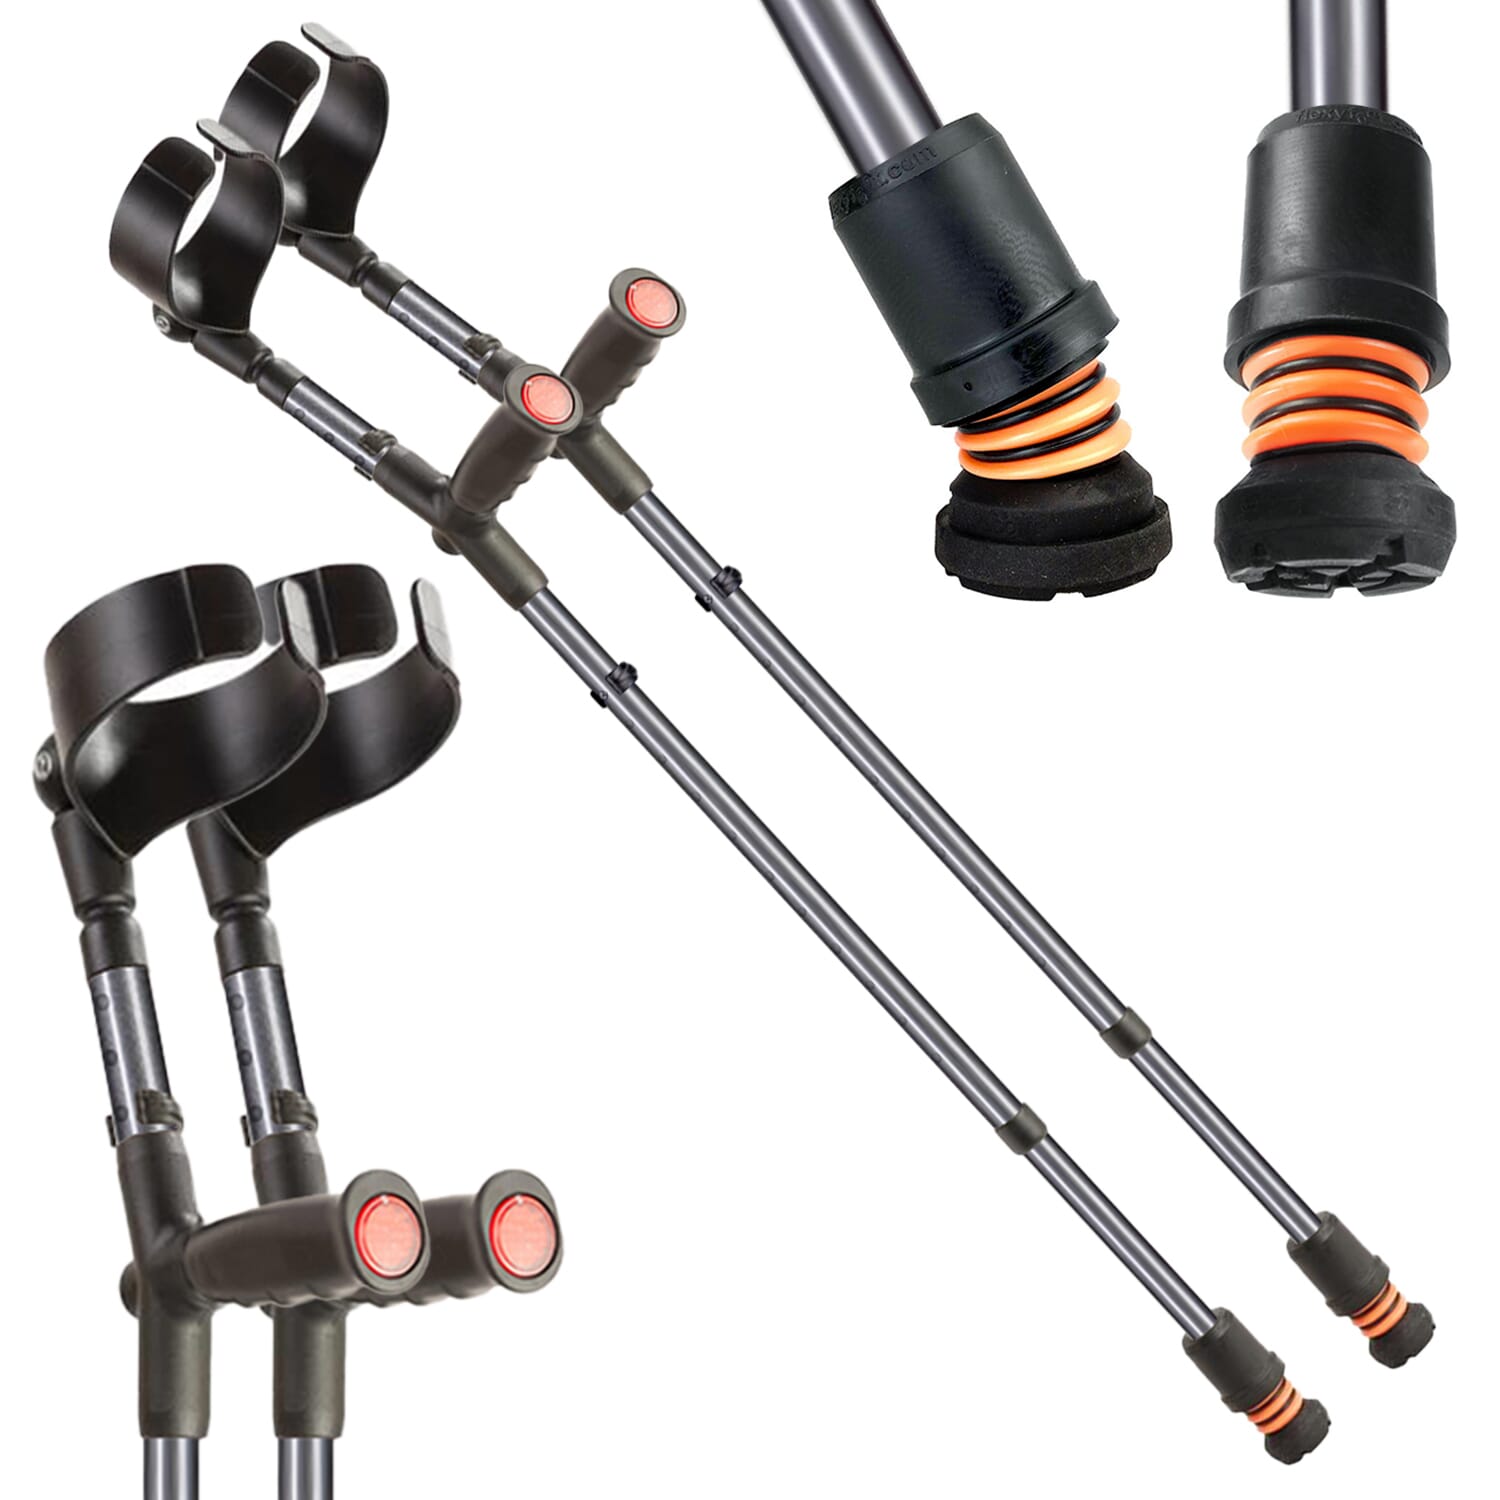 View Flexyfoot Soft Grip Double Adjustable Crutches Grey Pair information